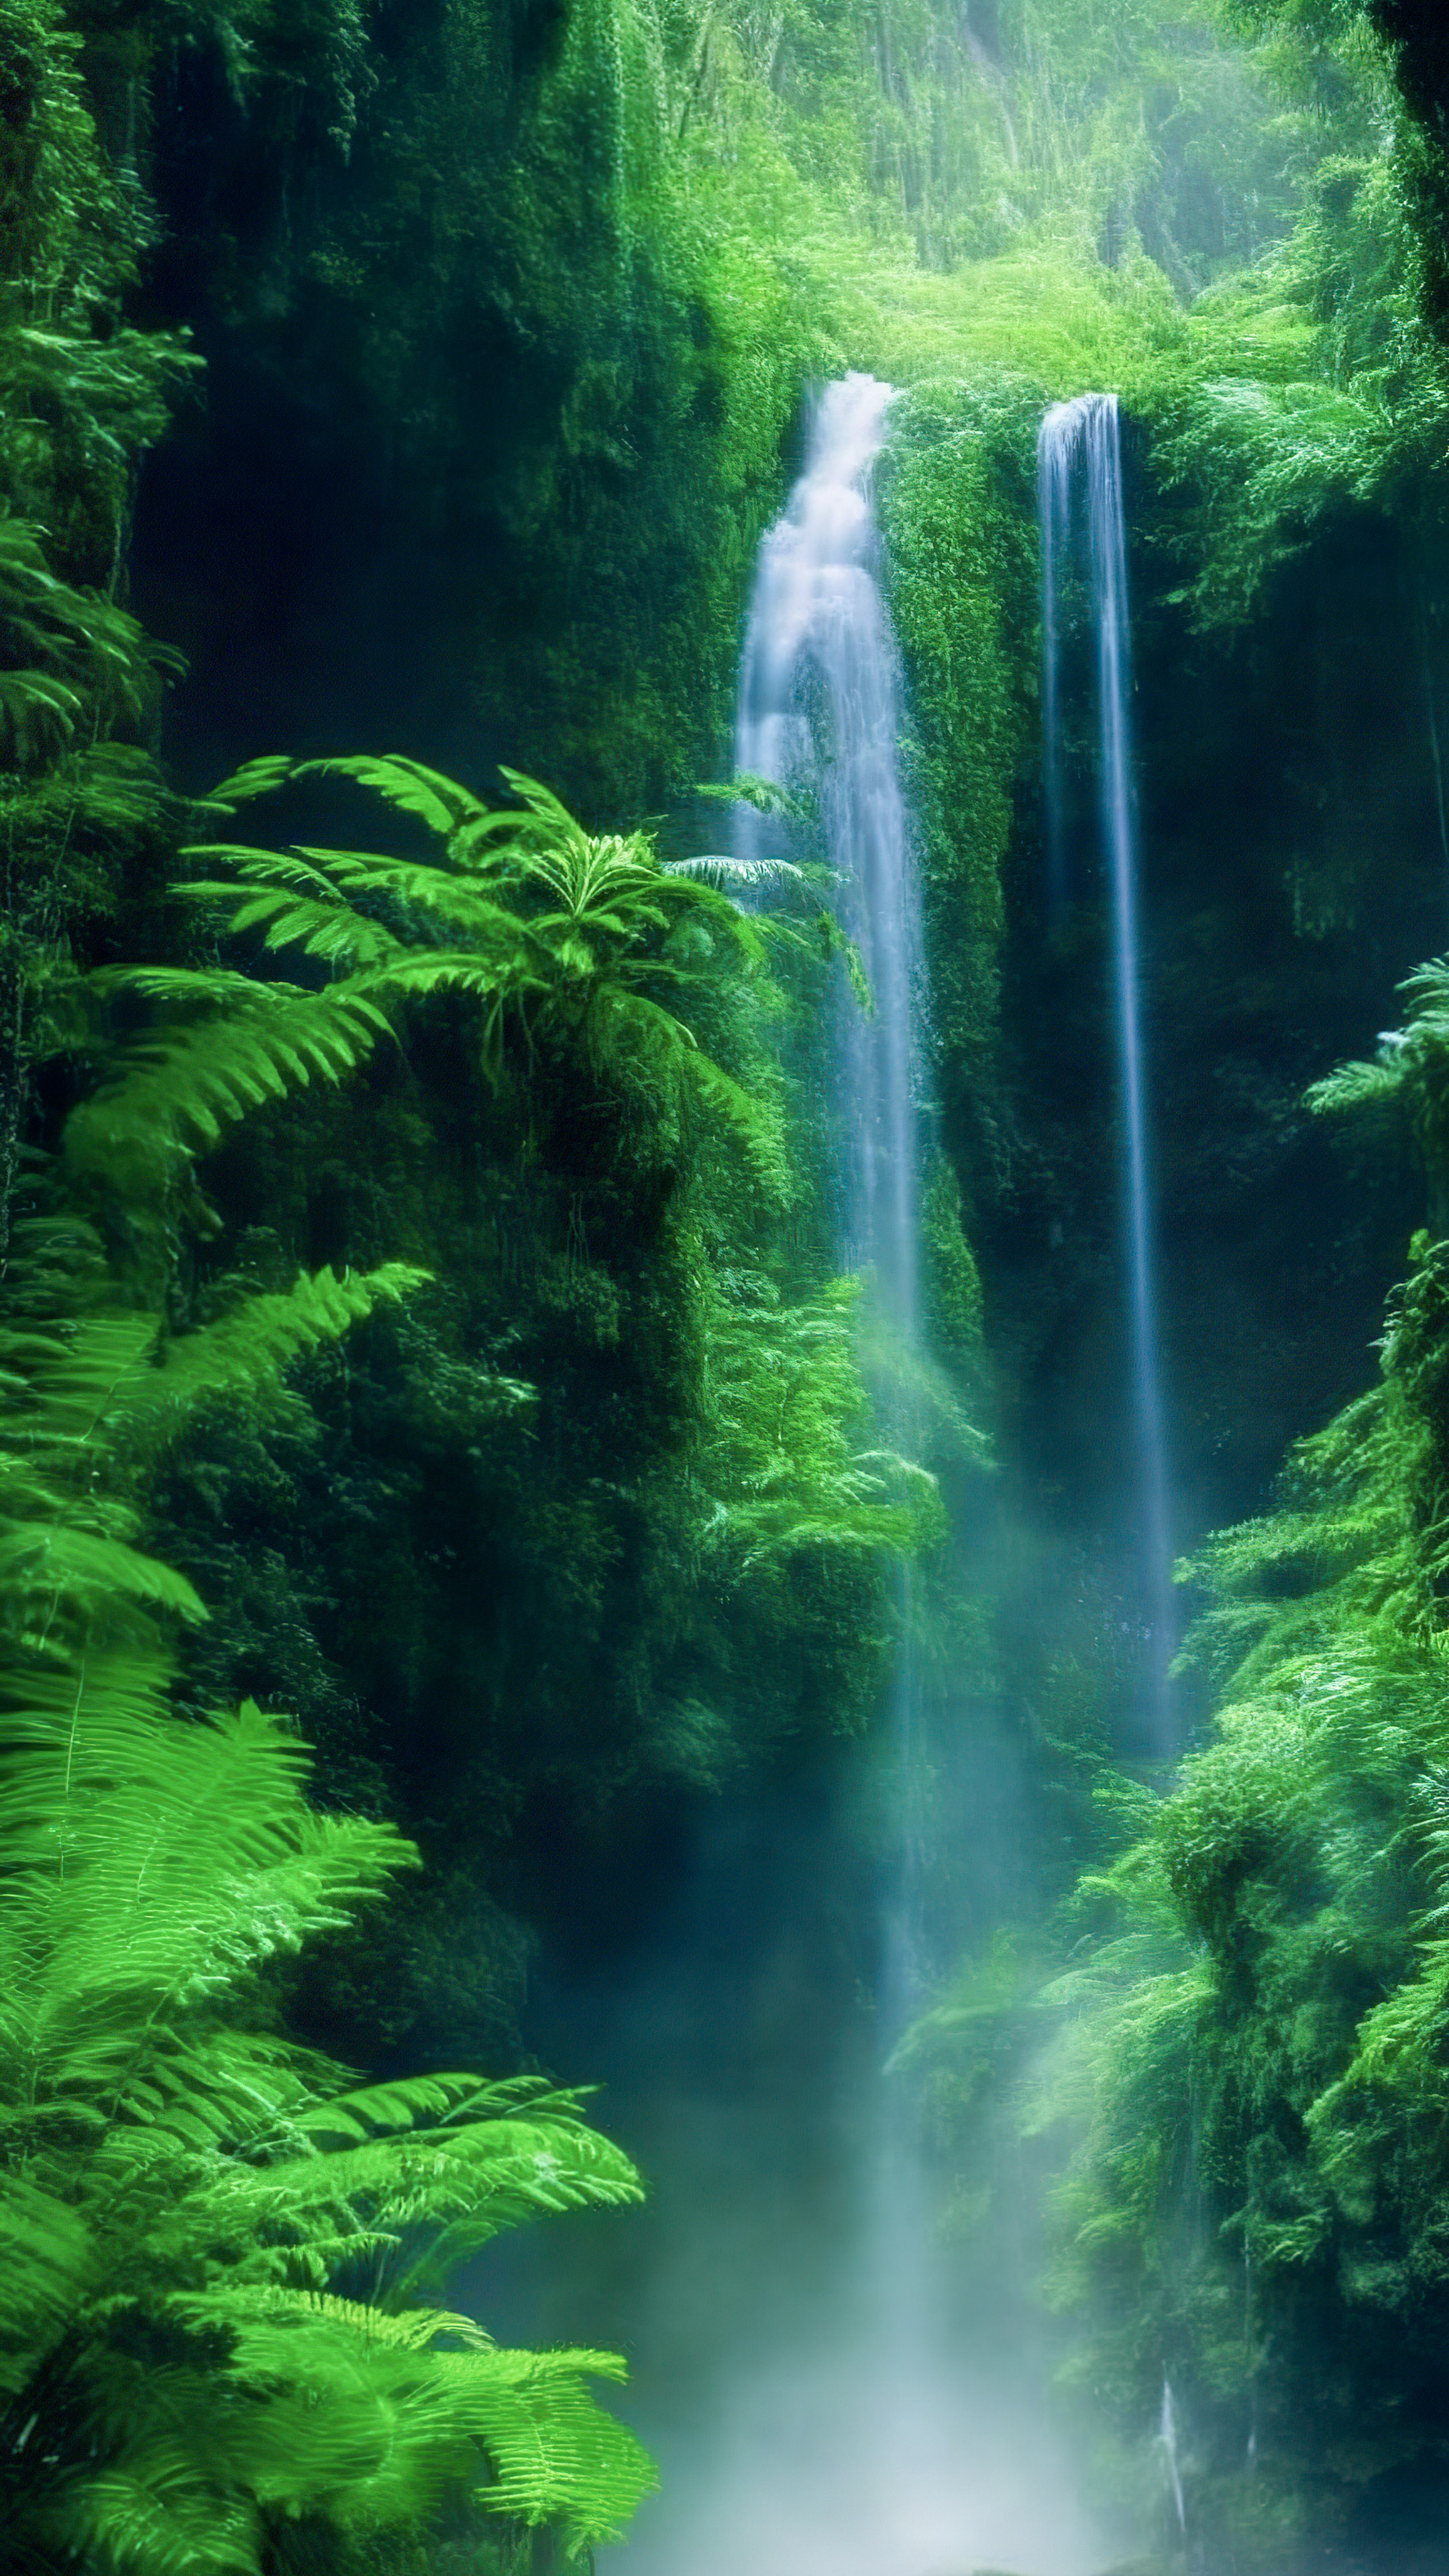 Get lost in the magic of our nature beautiful waterfall wallpaper, revealing an enchanting waterfall hidden deep in the lush, emerald-green rainforest.